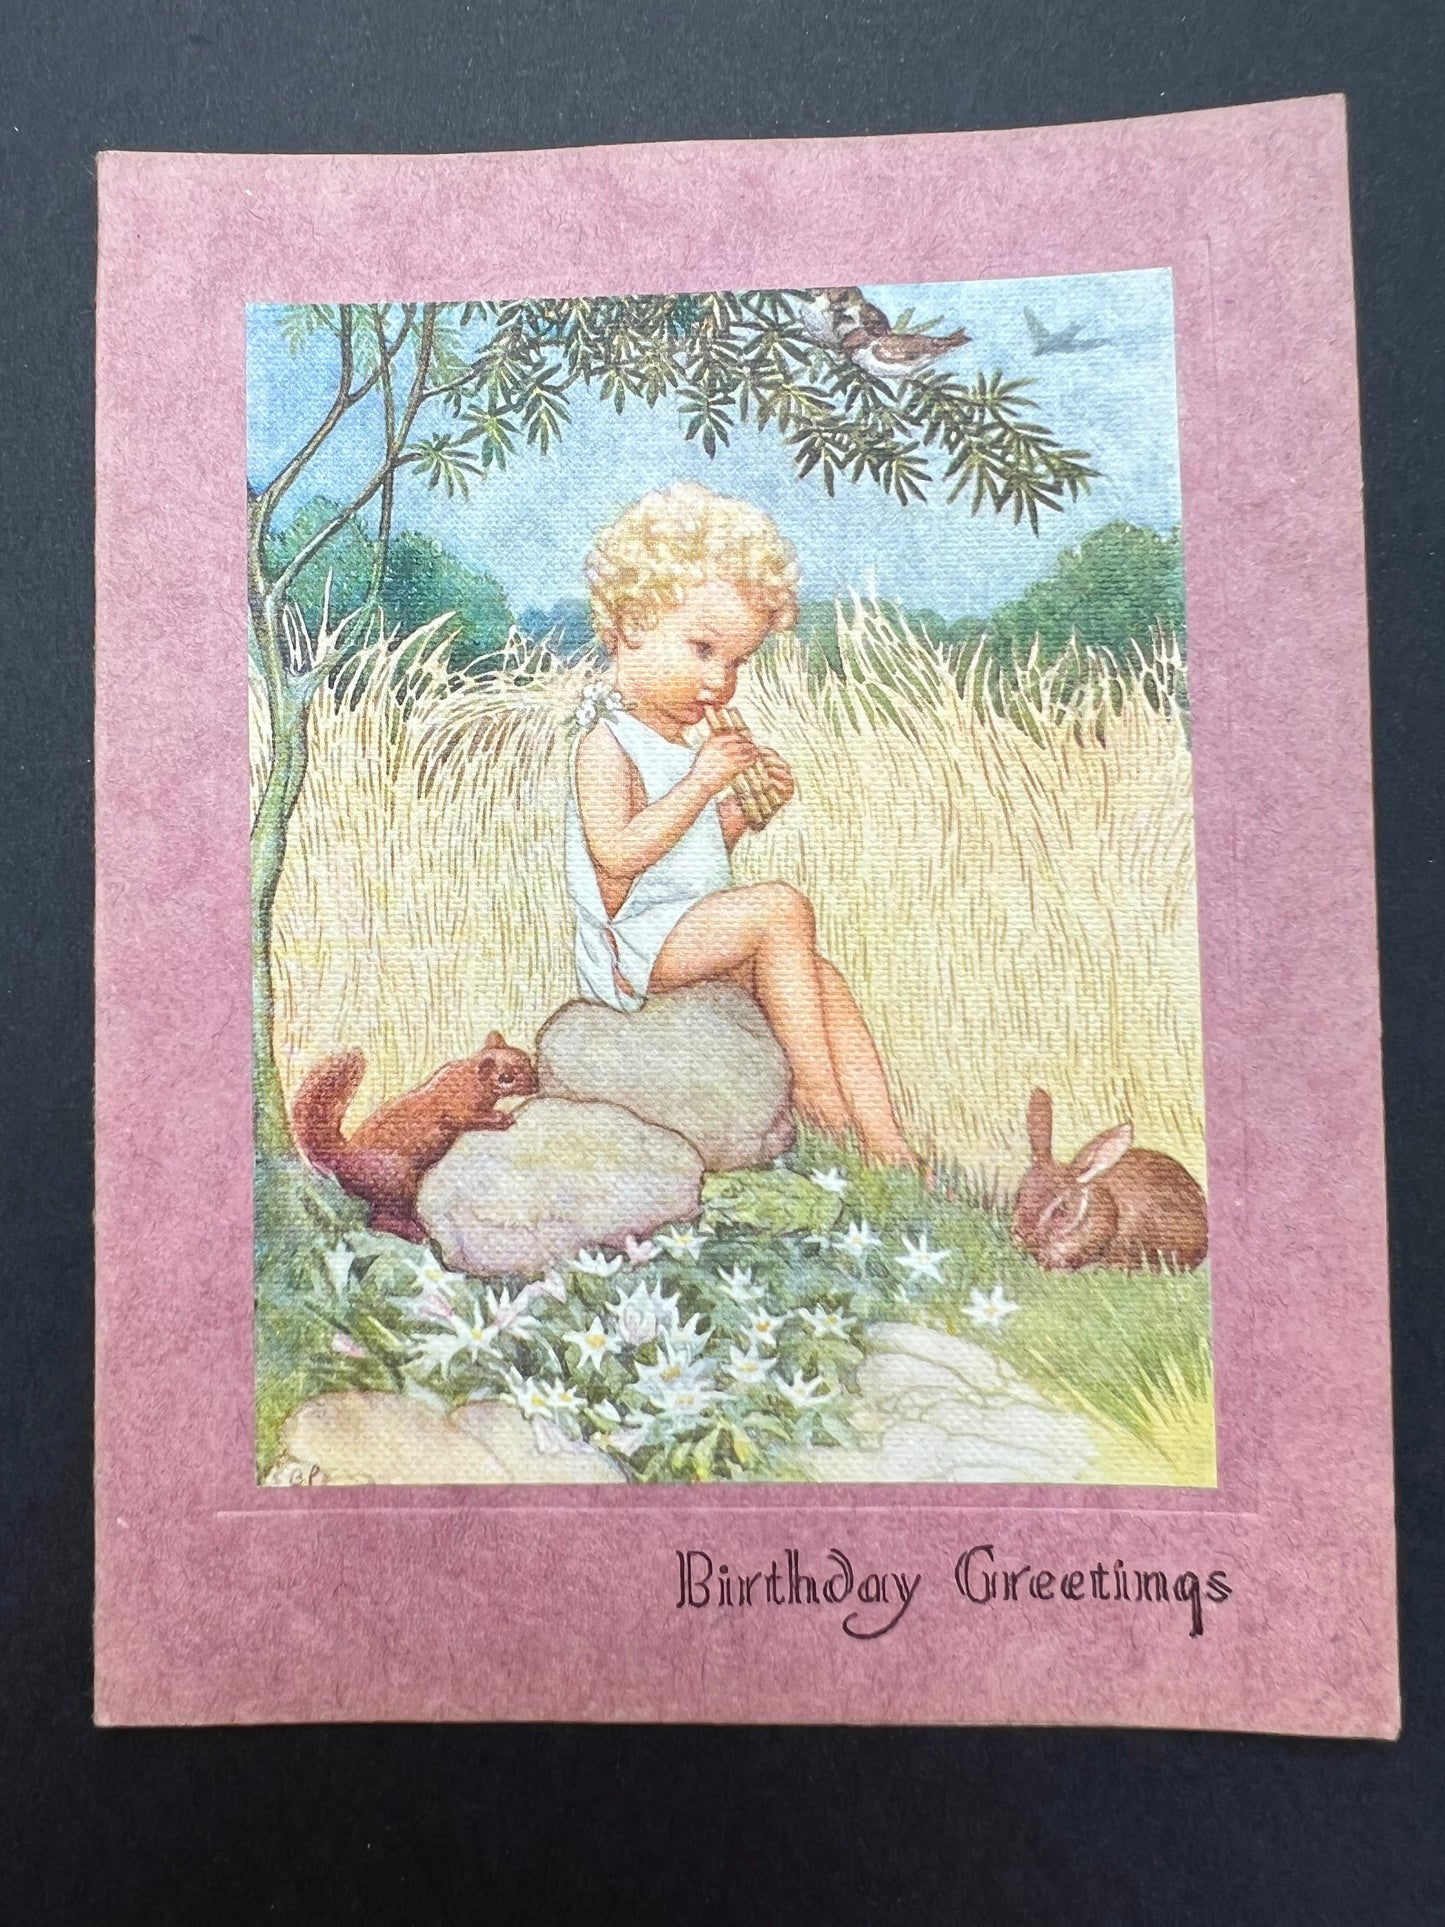 Delightful Unused 1940s Birthday Cards  with S.B Pearse Illustrations.